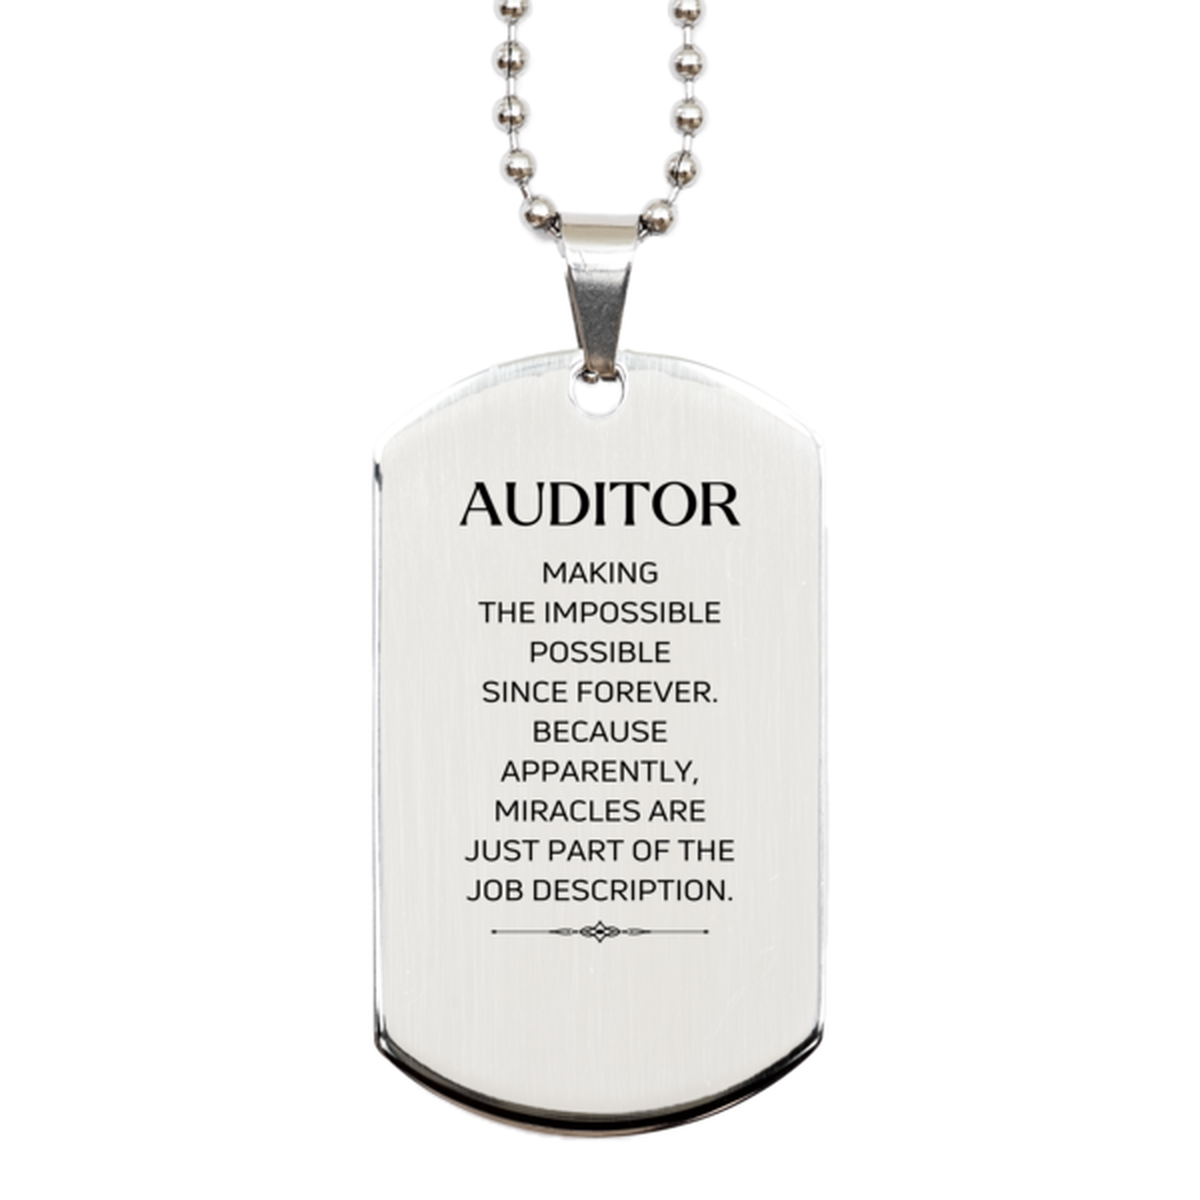 Funny Auditor Gifts, Miracles are just part of the job description, Inspirational Birthday Silver Dog Tag For Auditor, Men, Women, Coworkers, Friends, Boss